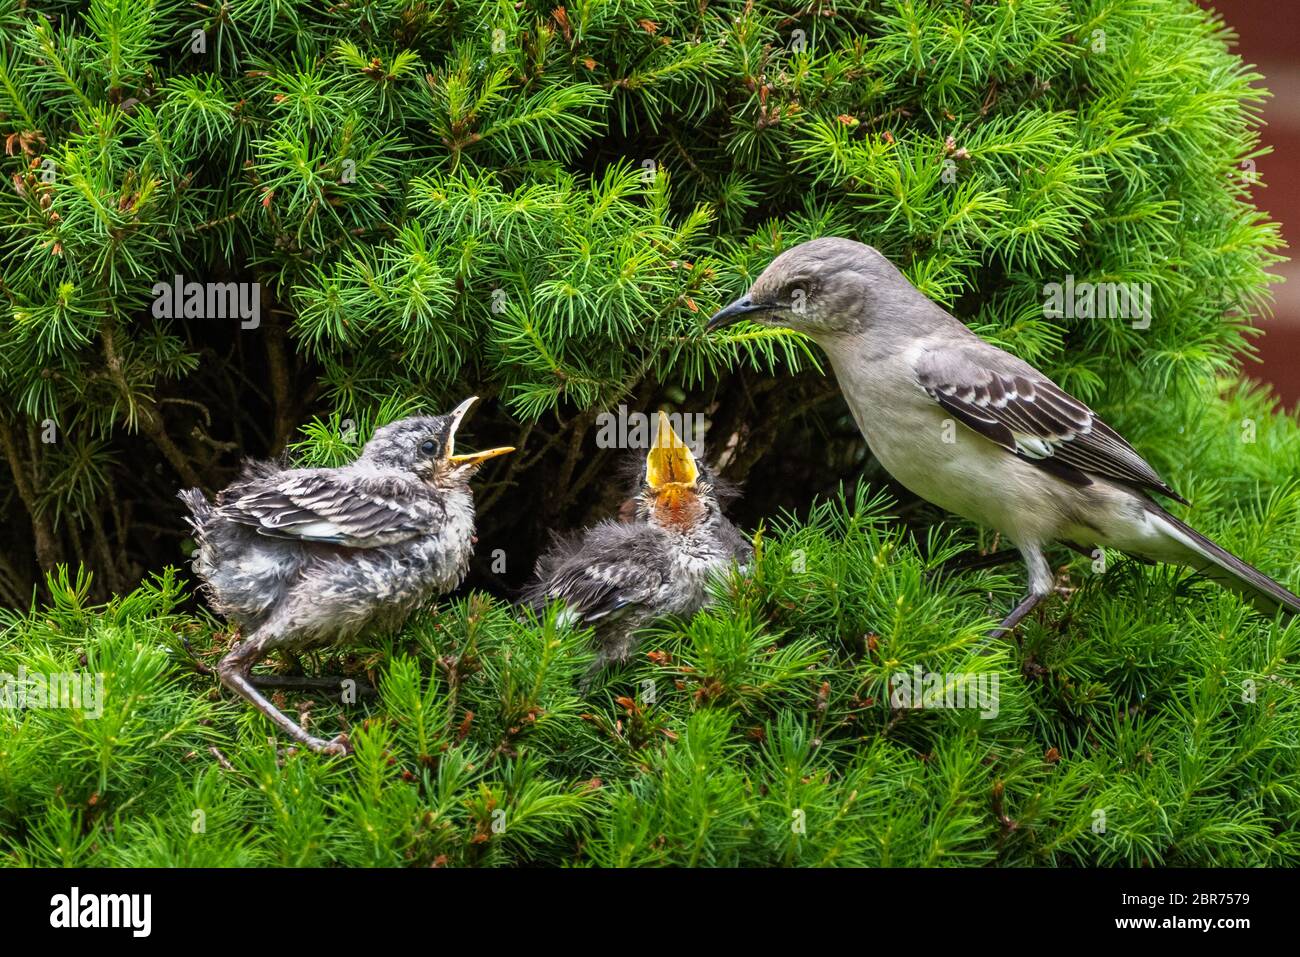 Young Mockingbird babies are begging for food with mouths open in front of the mother while perched in a pine tree against a green background. Stock Photo